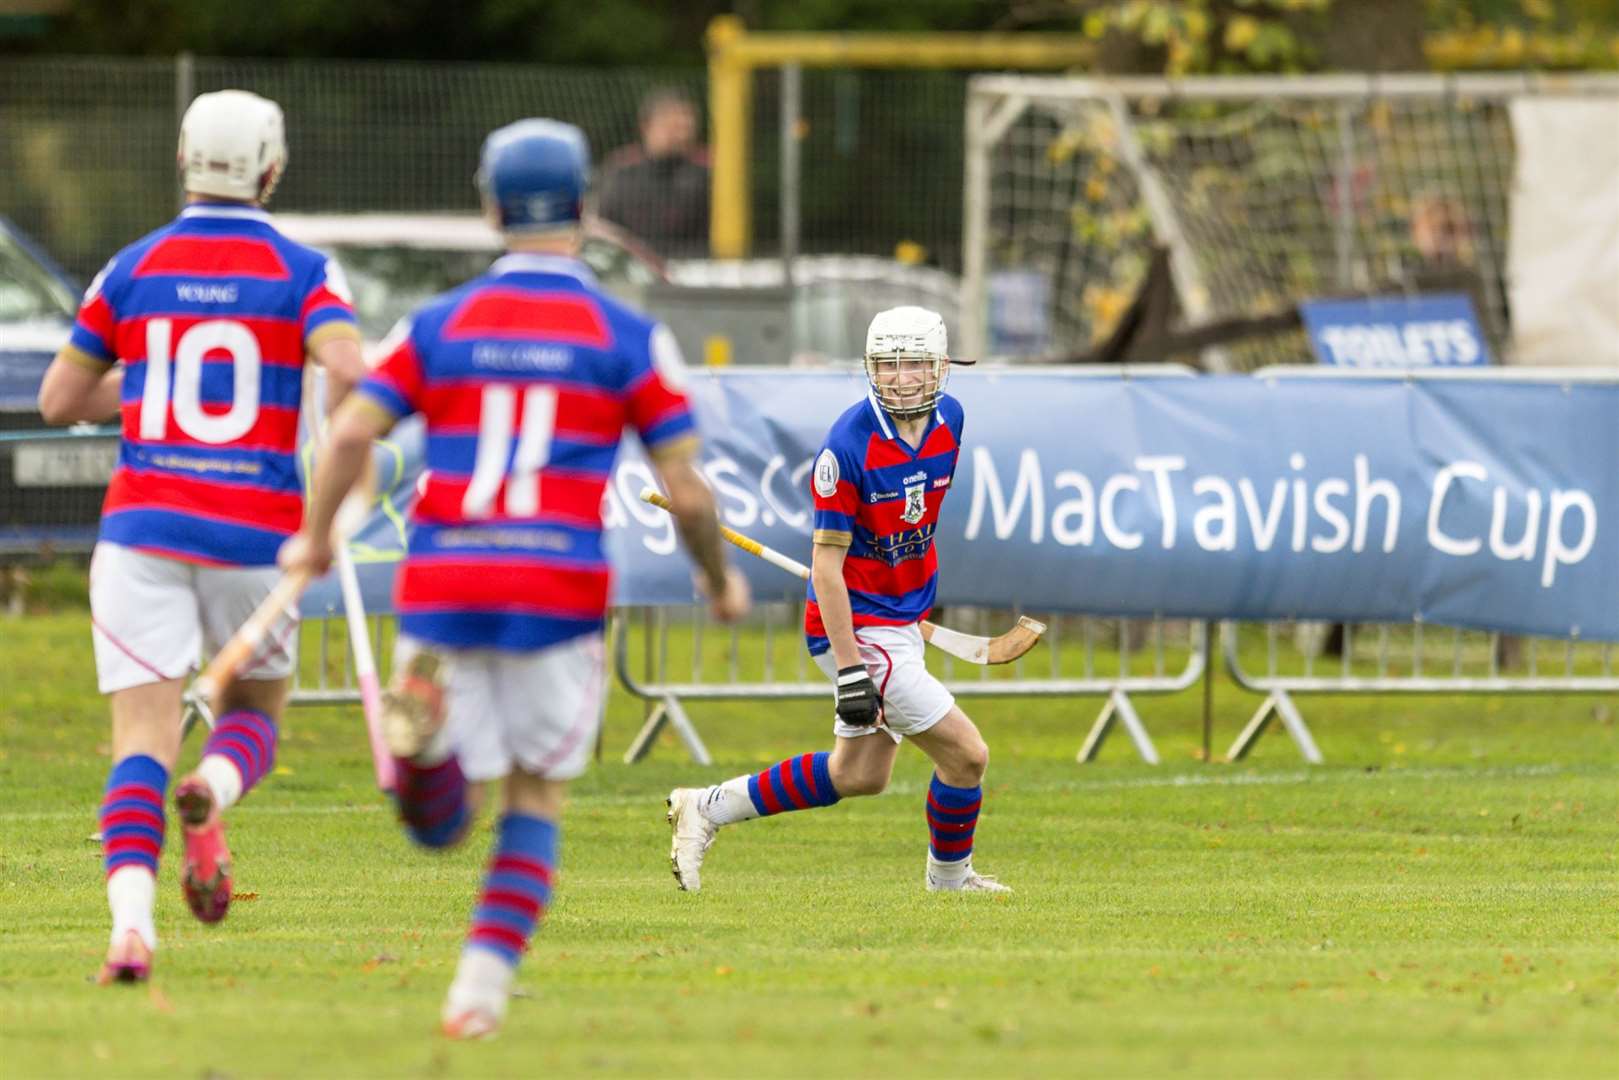 Ruaridh Anderson (right) celebrates after scoring the opening goal for Kingussie against Kinlochshiel in the cottages.com MacTavish Cup Final played at The Bught, Inverness.